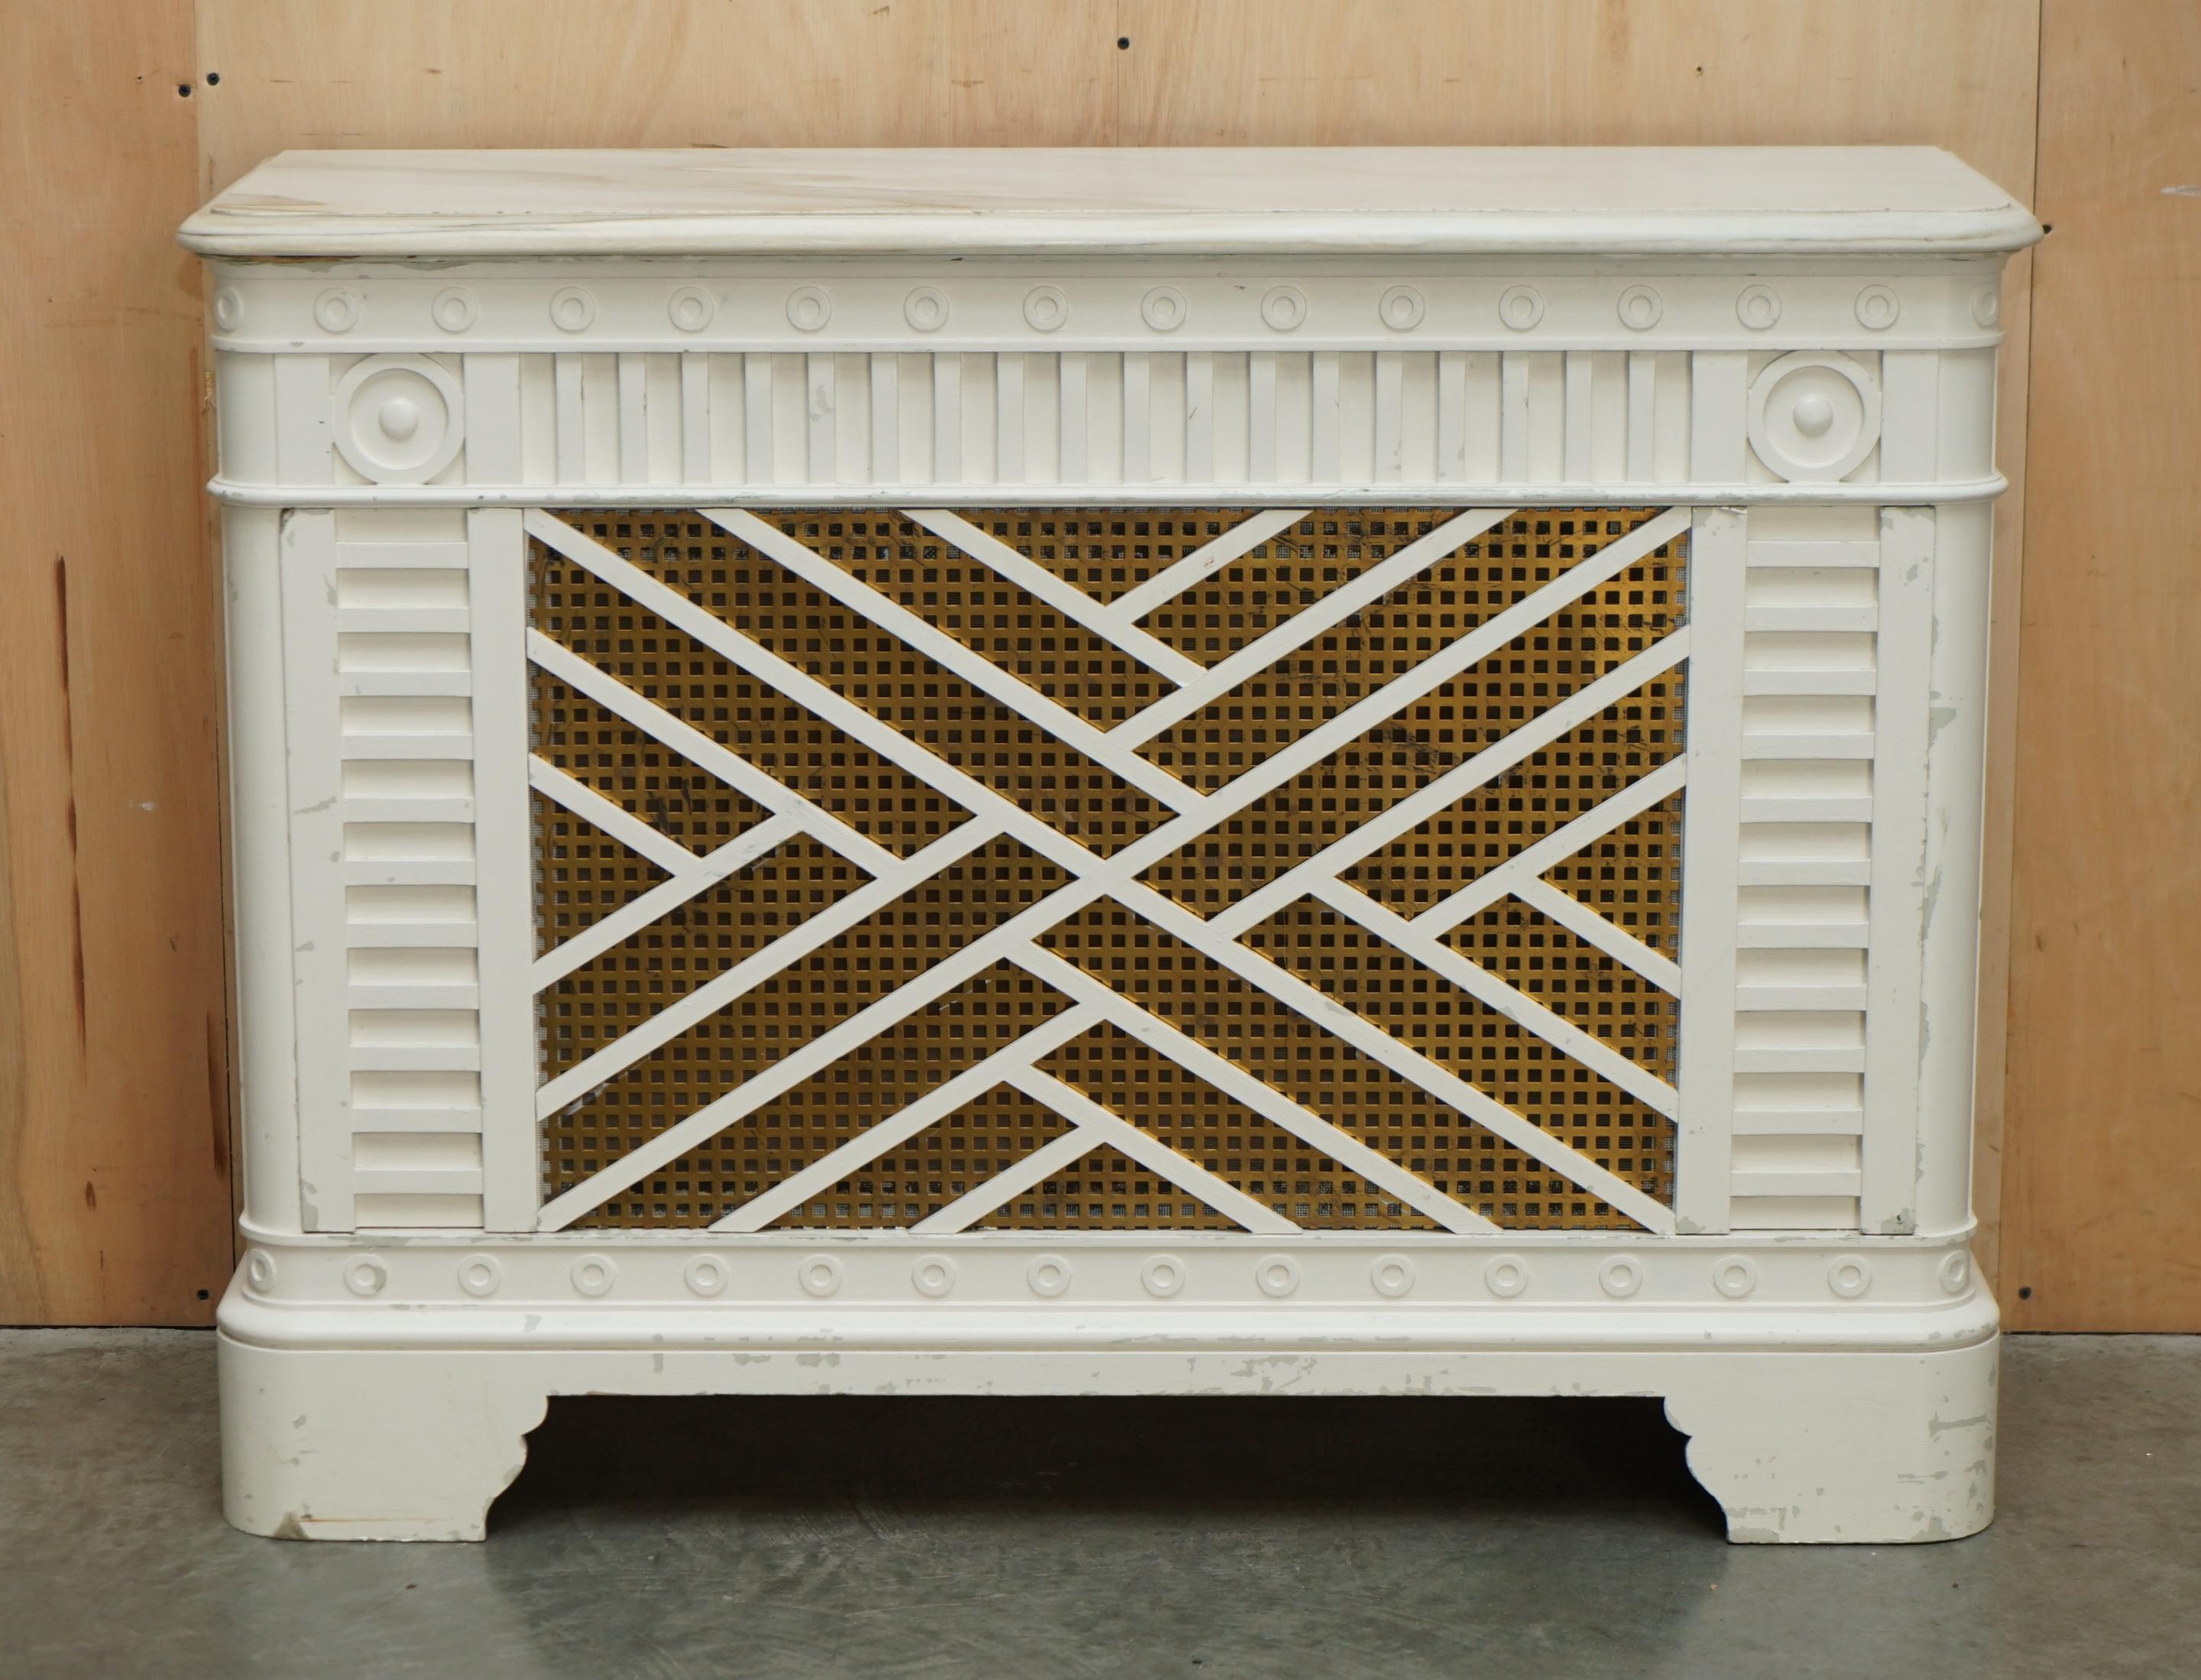 marble radiator cover